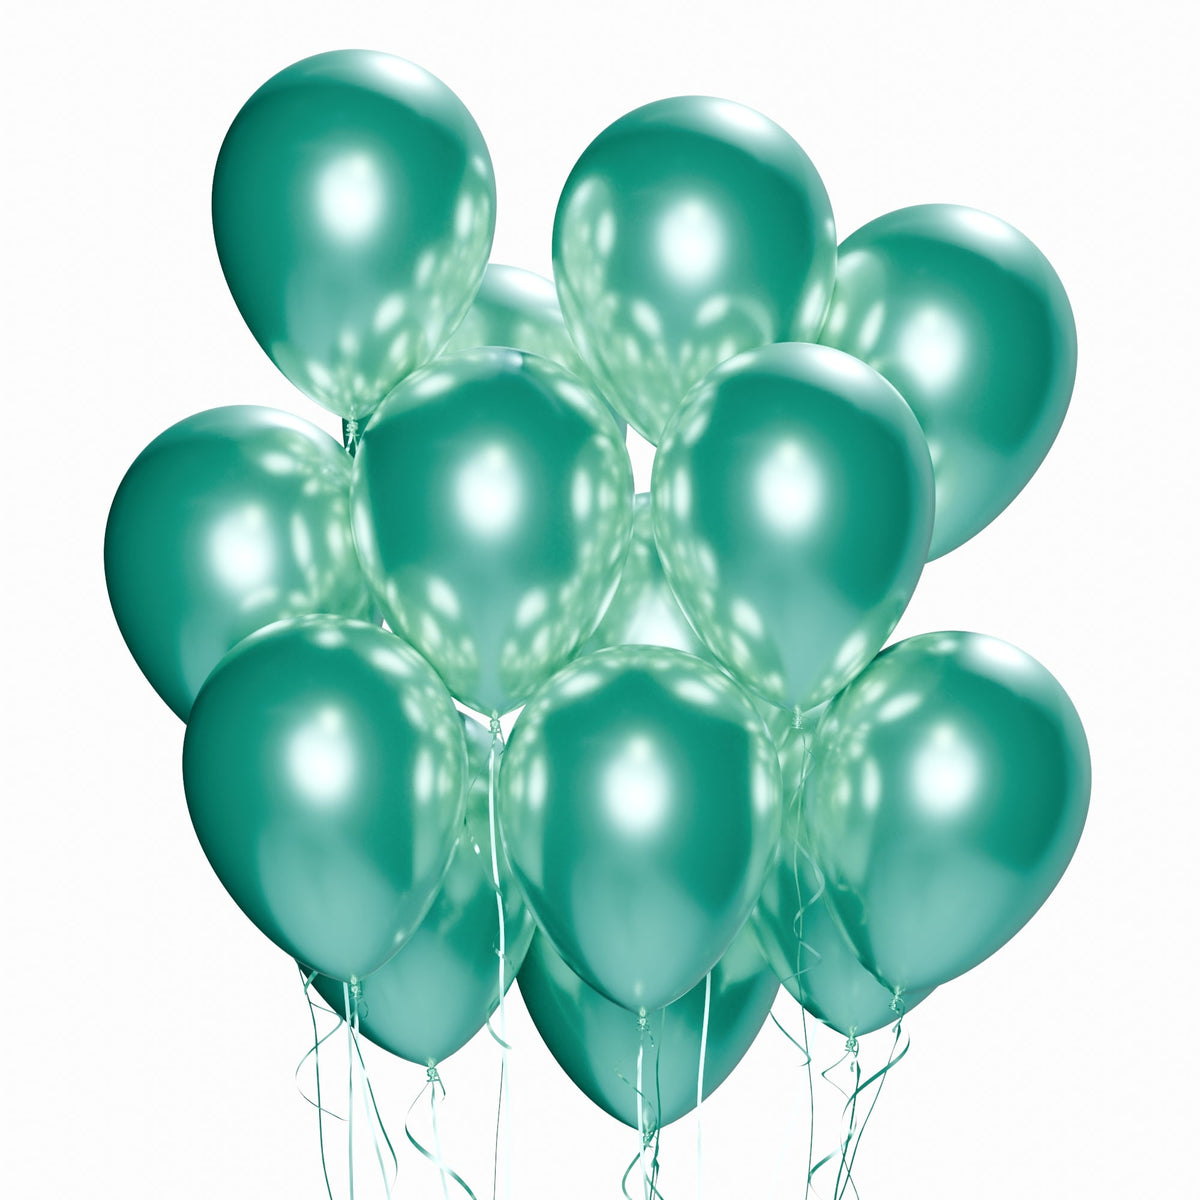 WIDE OCEAN INTERNATIONAL TRADE BEIJING CO., LTD Balloons Green Latex Balloon 12 Inches, Chrome Collection, 72 Count 810064198663